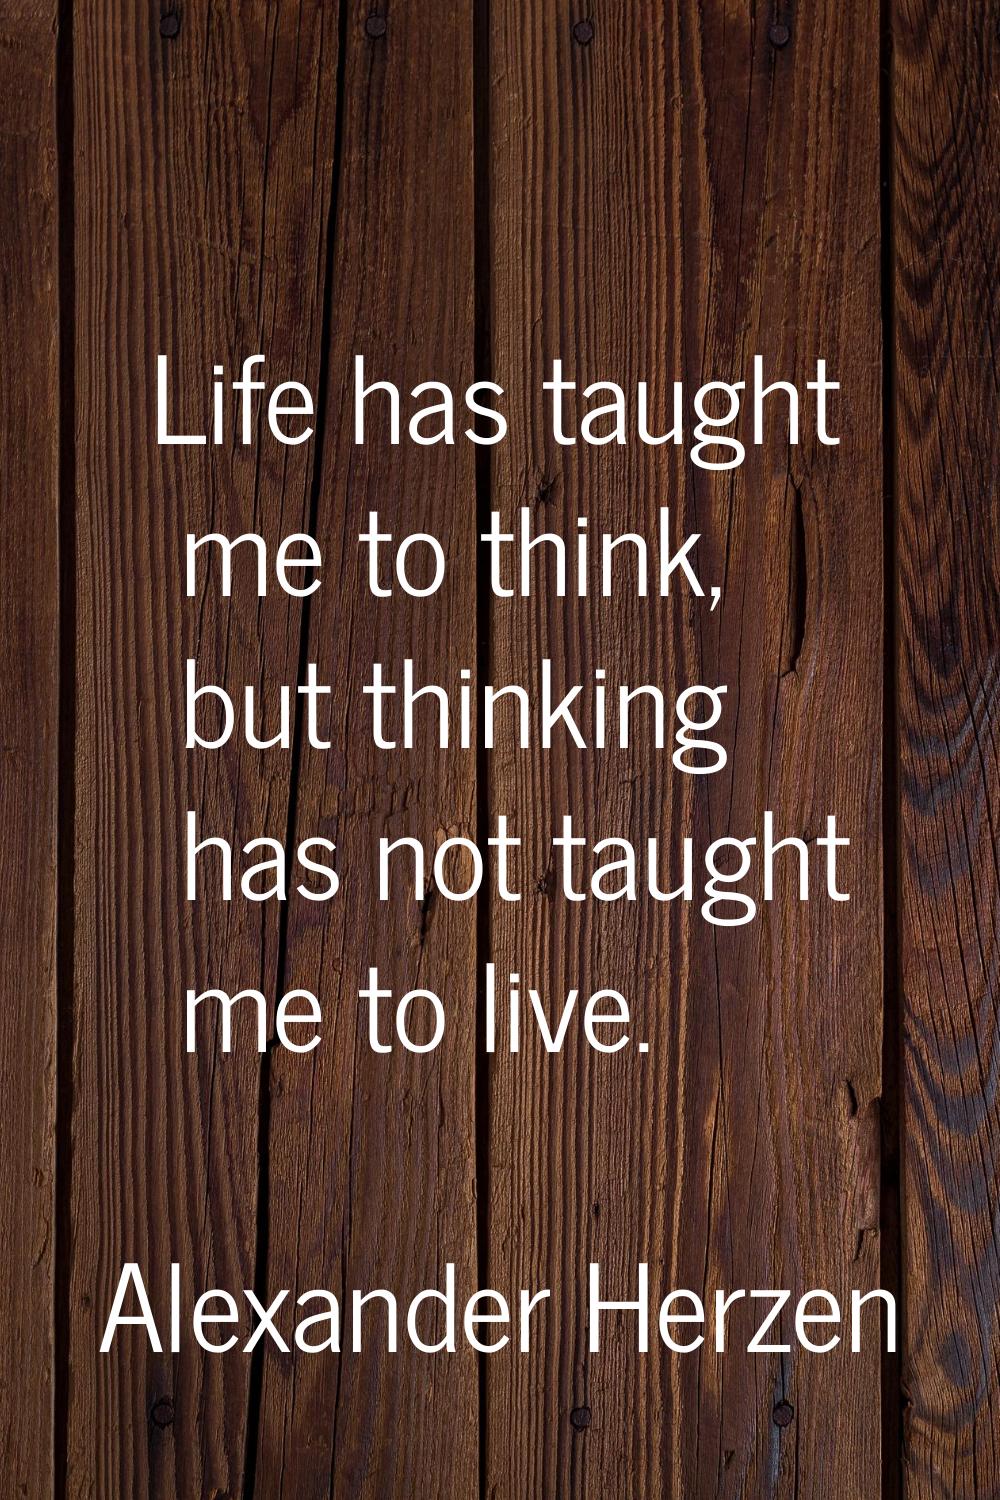 Life has taught me to think, but thinking has not taught me to live.